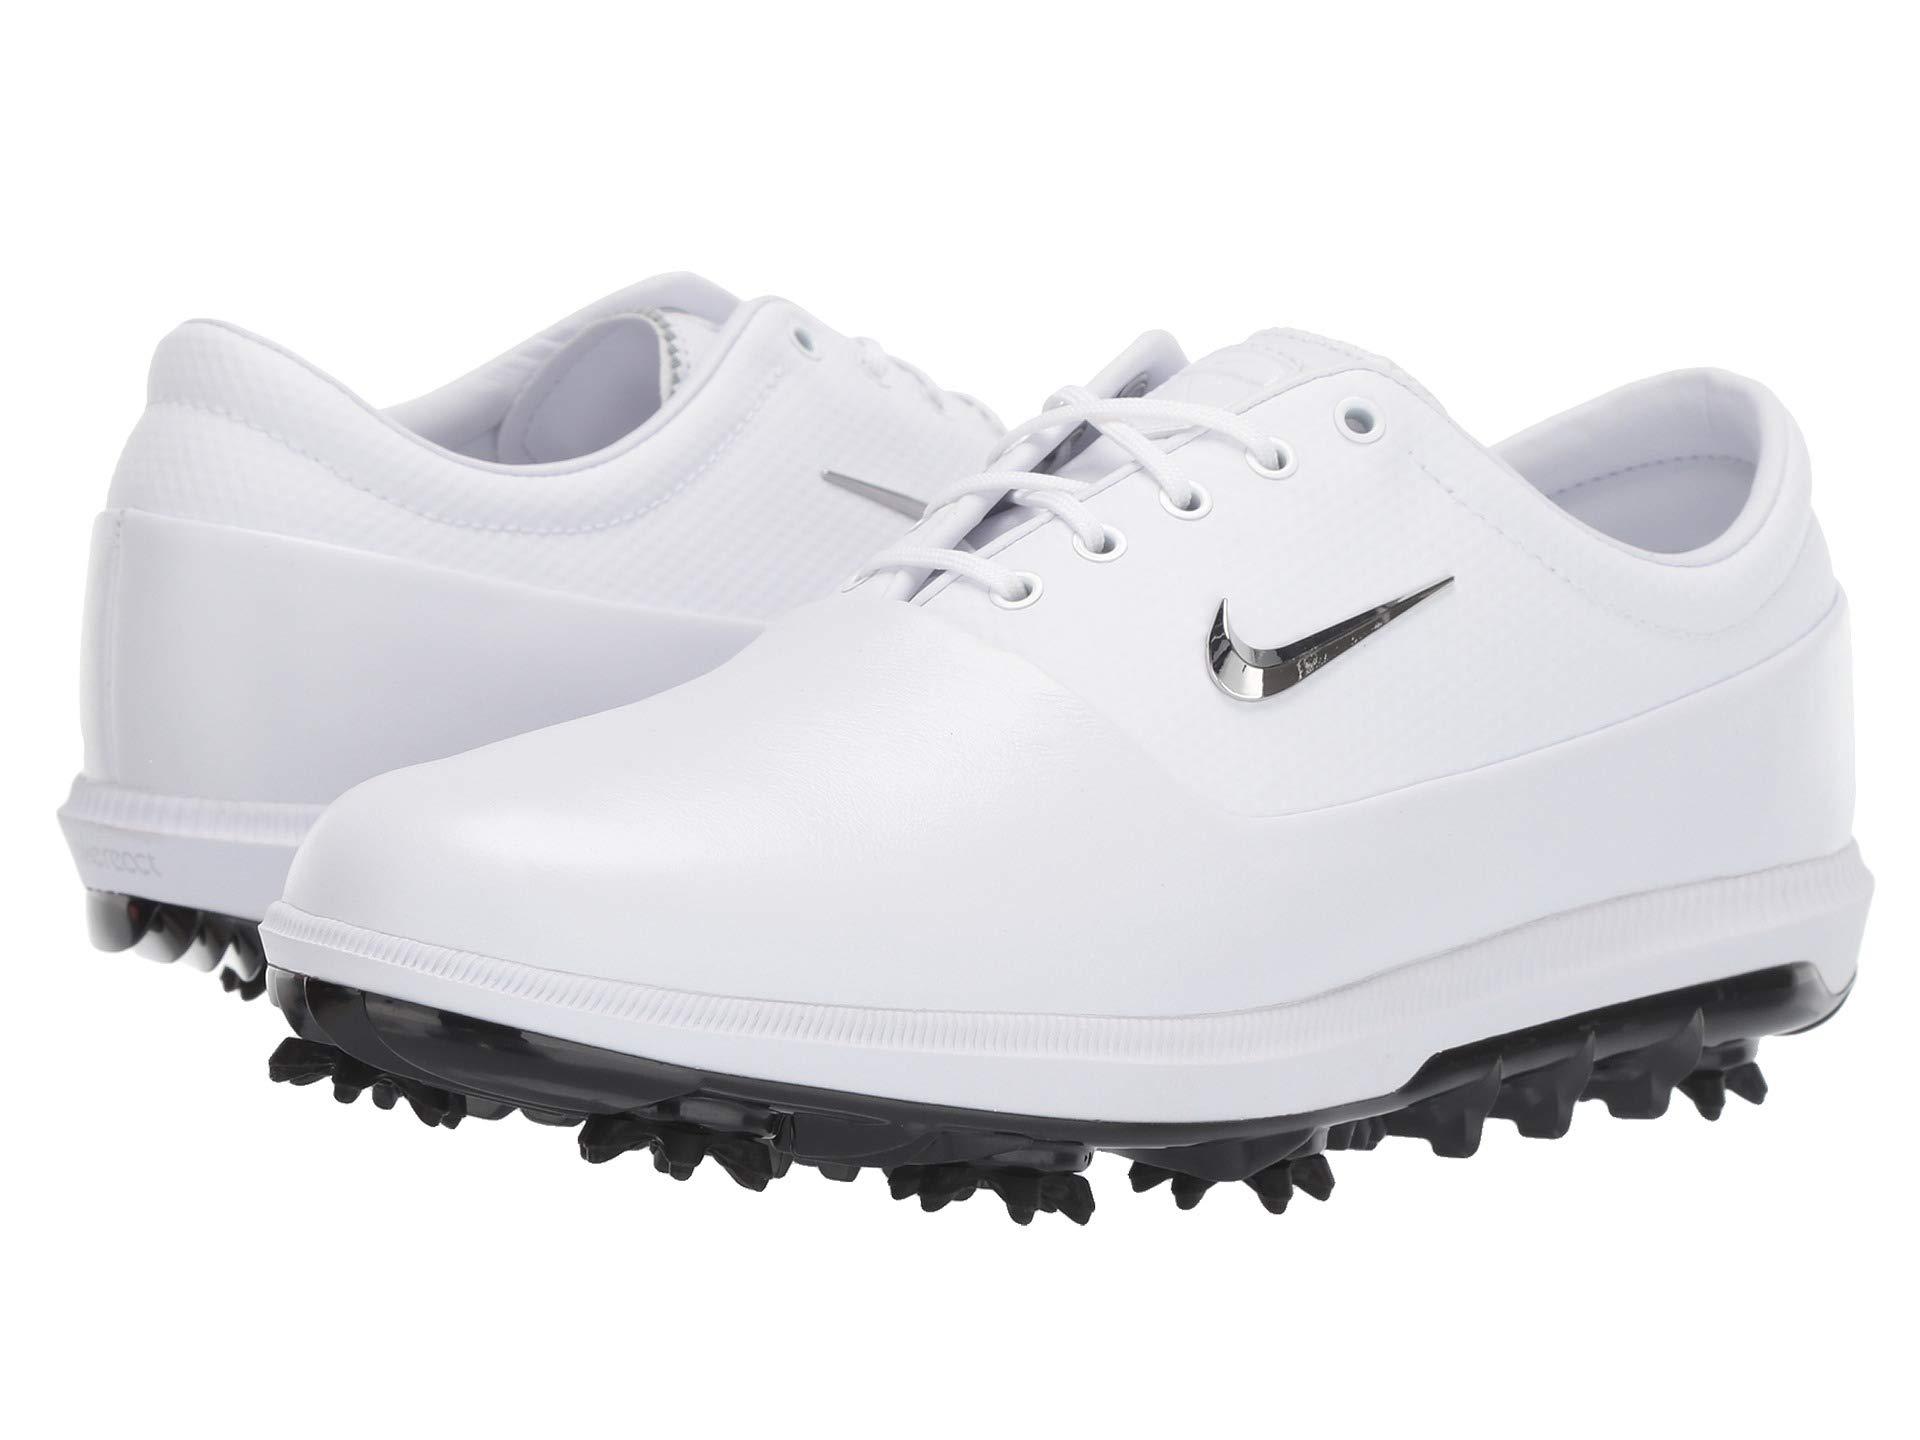 Nike Air Zoom Victory Tour Golf Shoe in Gray (White) for Men - Lyst